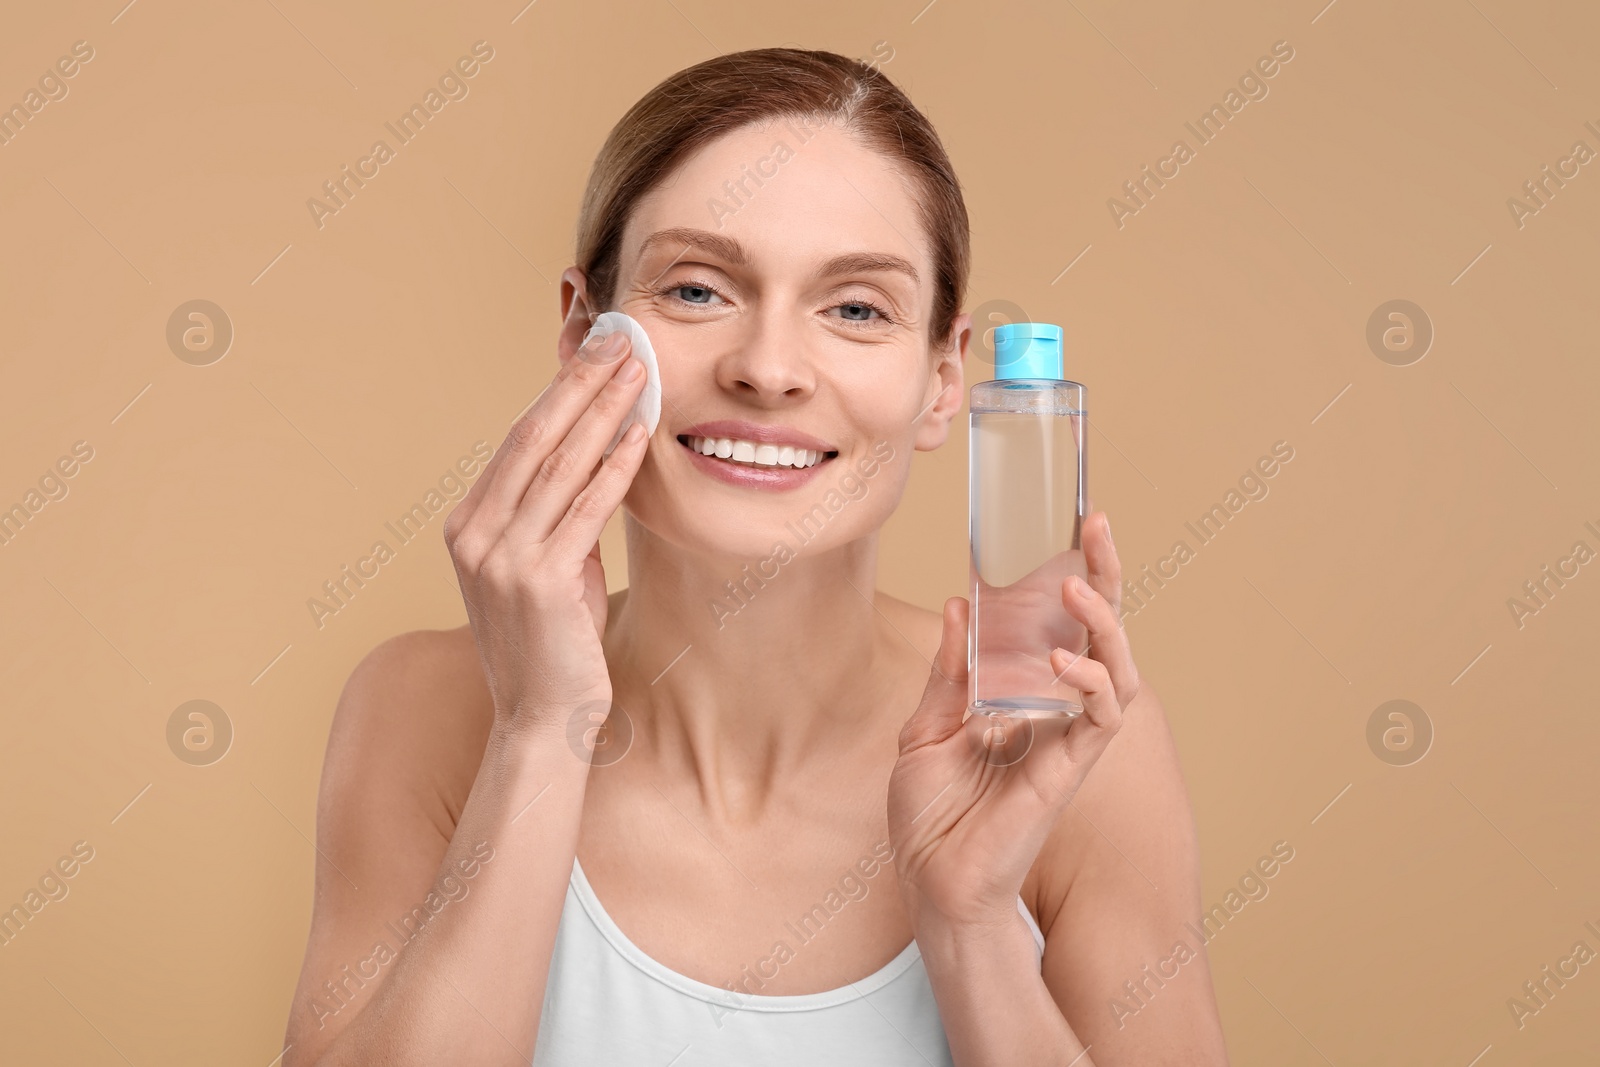 Photo of Beautiful woman removing makeup with cotton pad on beige background